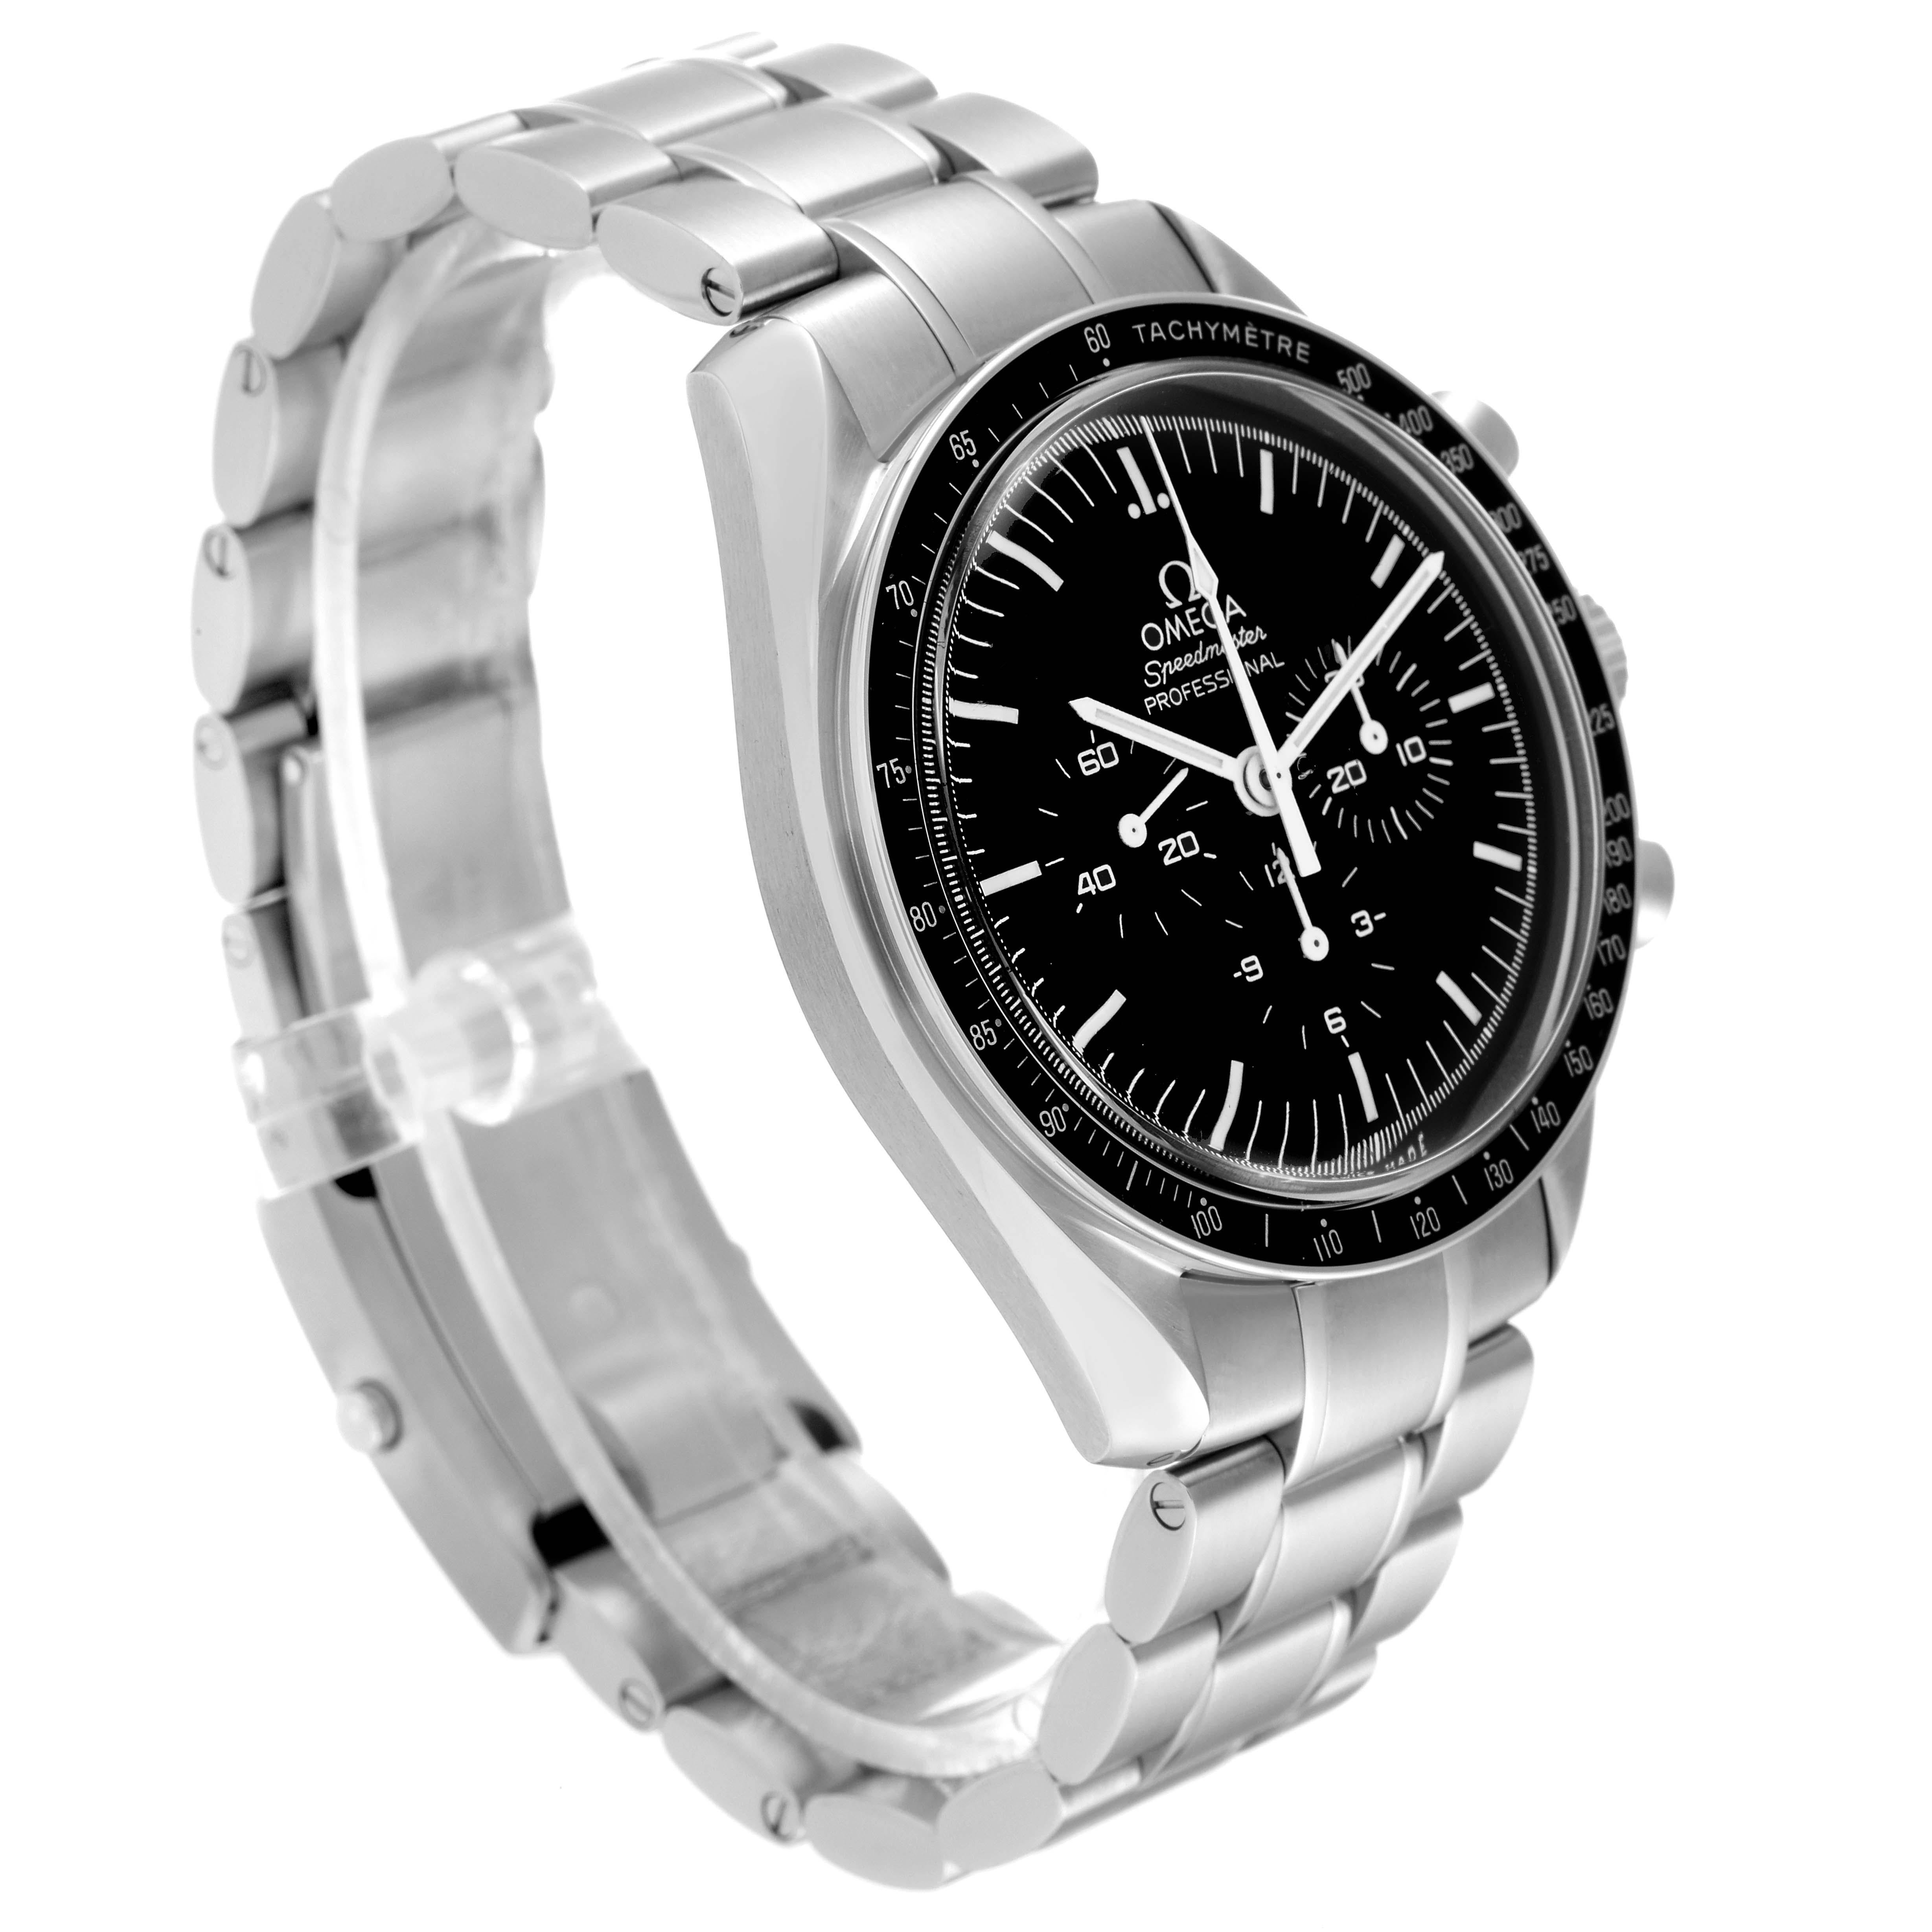 Omega Speedmaster Moonwatch Steel Mens Watch 311.30.42.30.01.005 Box Card In Excellent Condition For Sale In Atlanta, GA